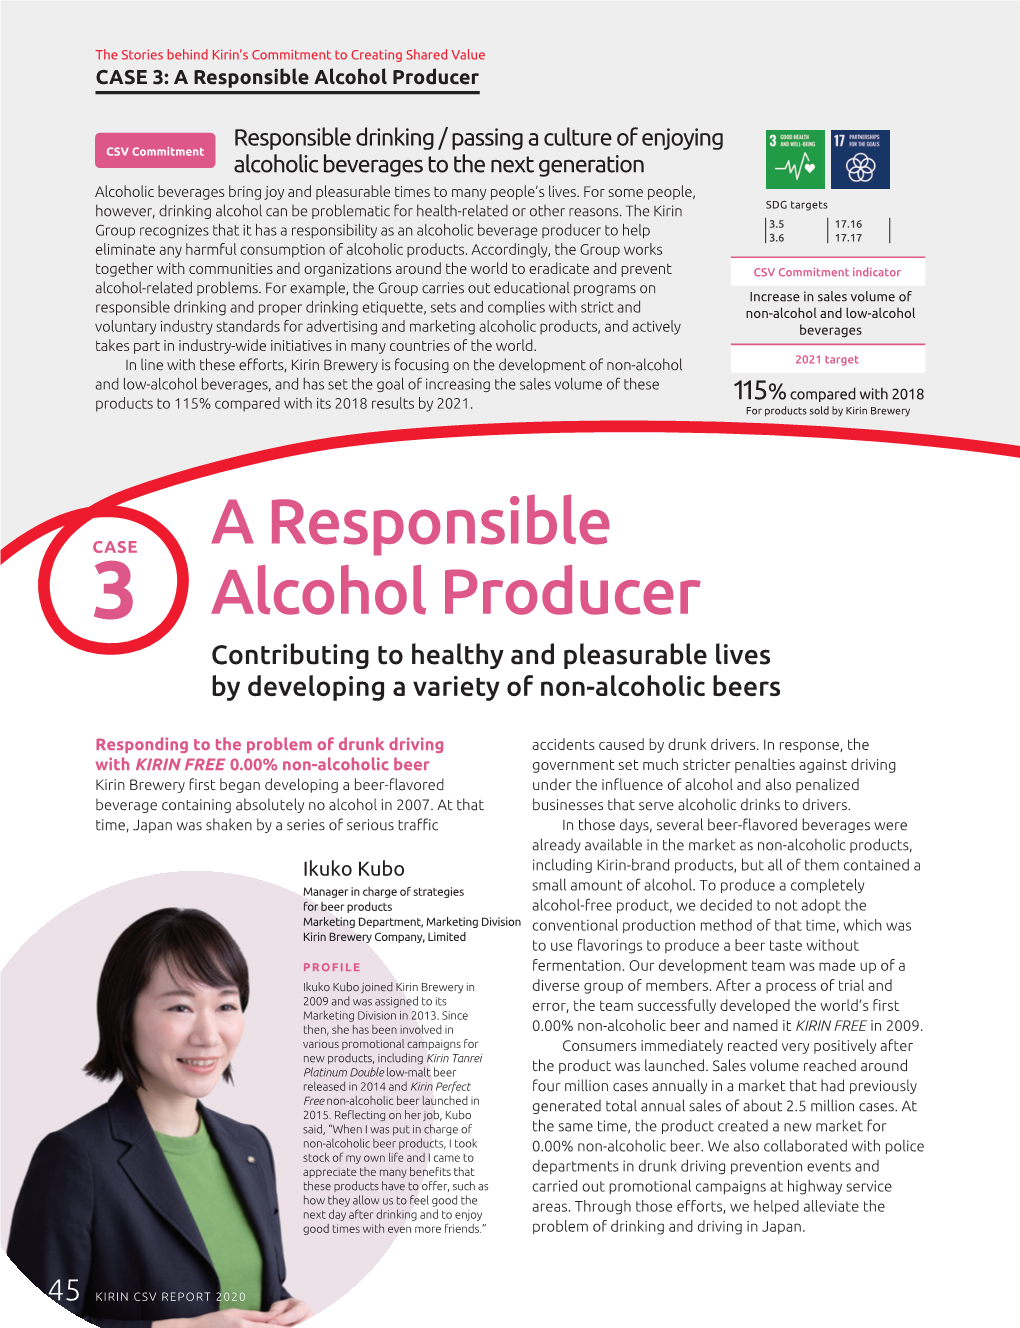 A Responsible Alcohol Producer